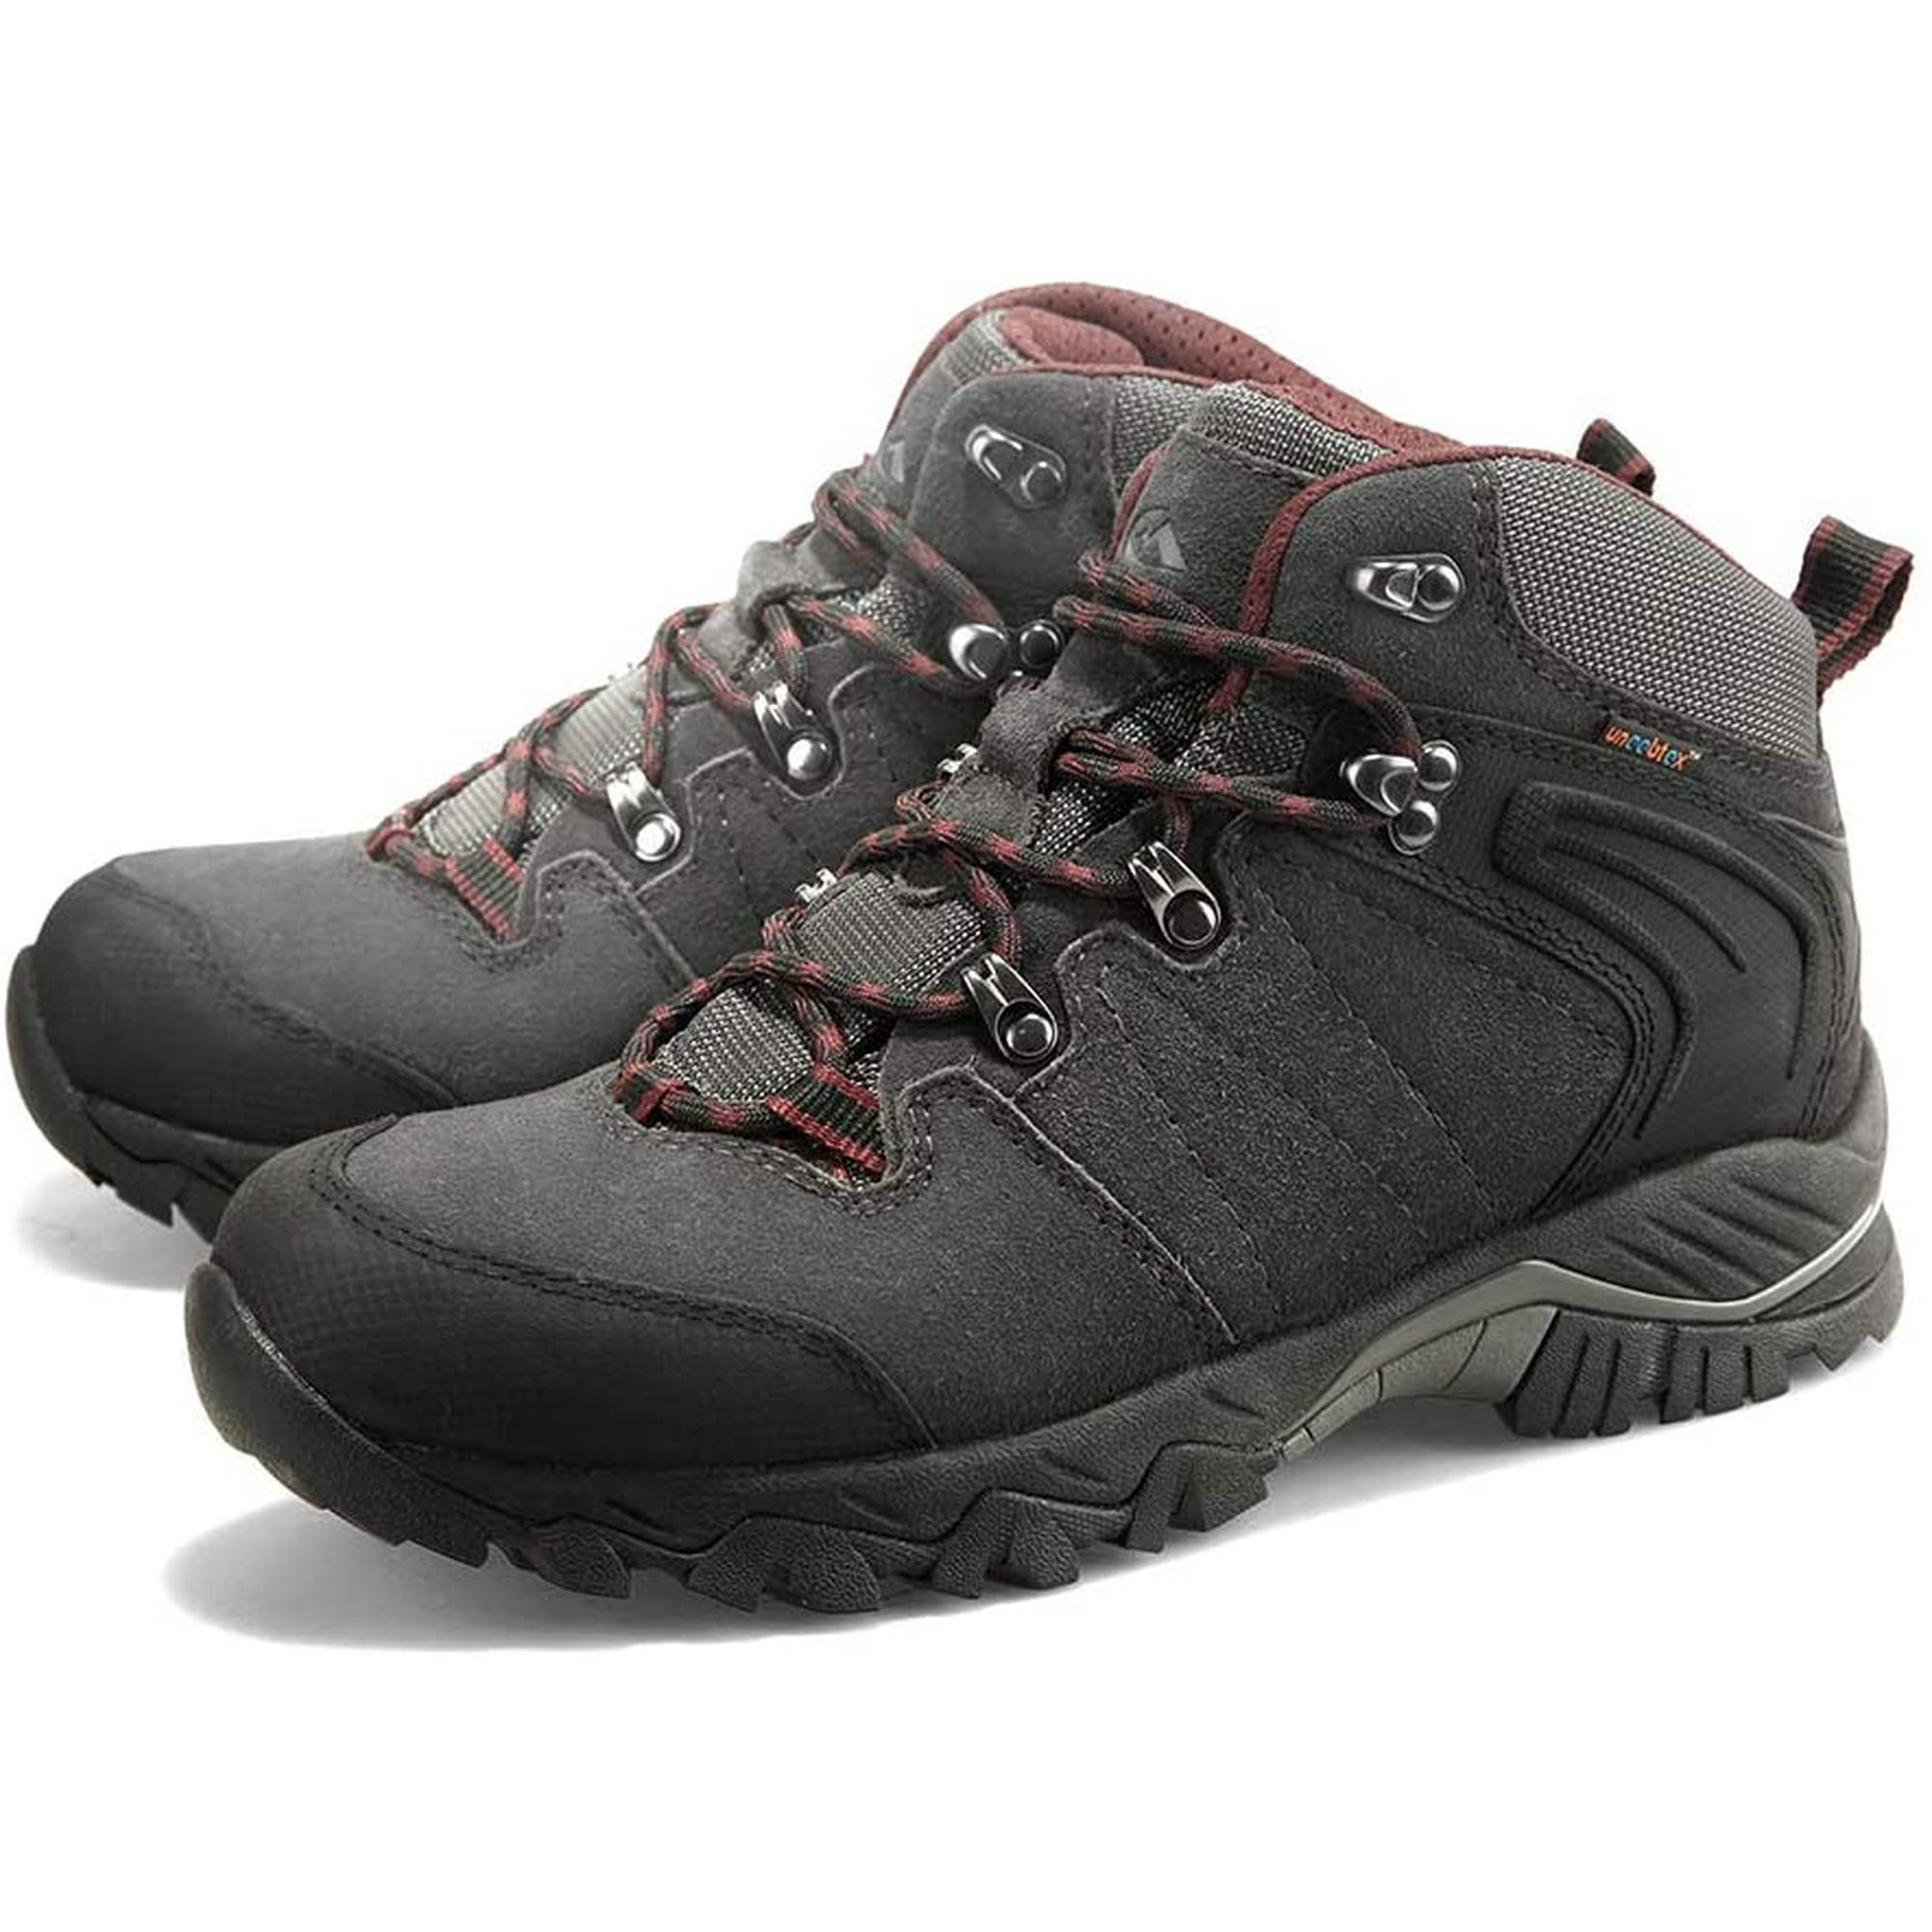 Hiking Boots Lightweight Breathable Waterproof Hiking Shoes for Men and  Women Outdoor Backpacking Climbing Hiking | Walmart Canada